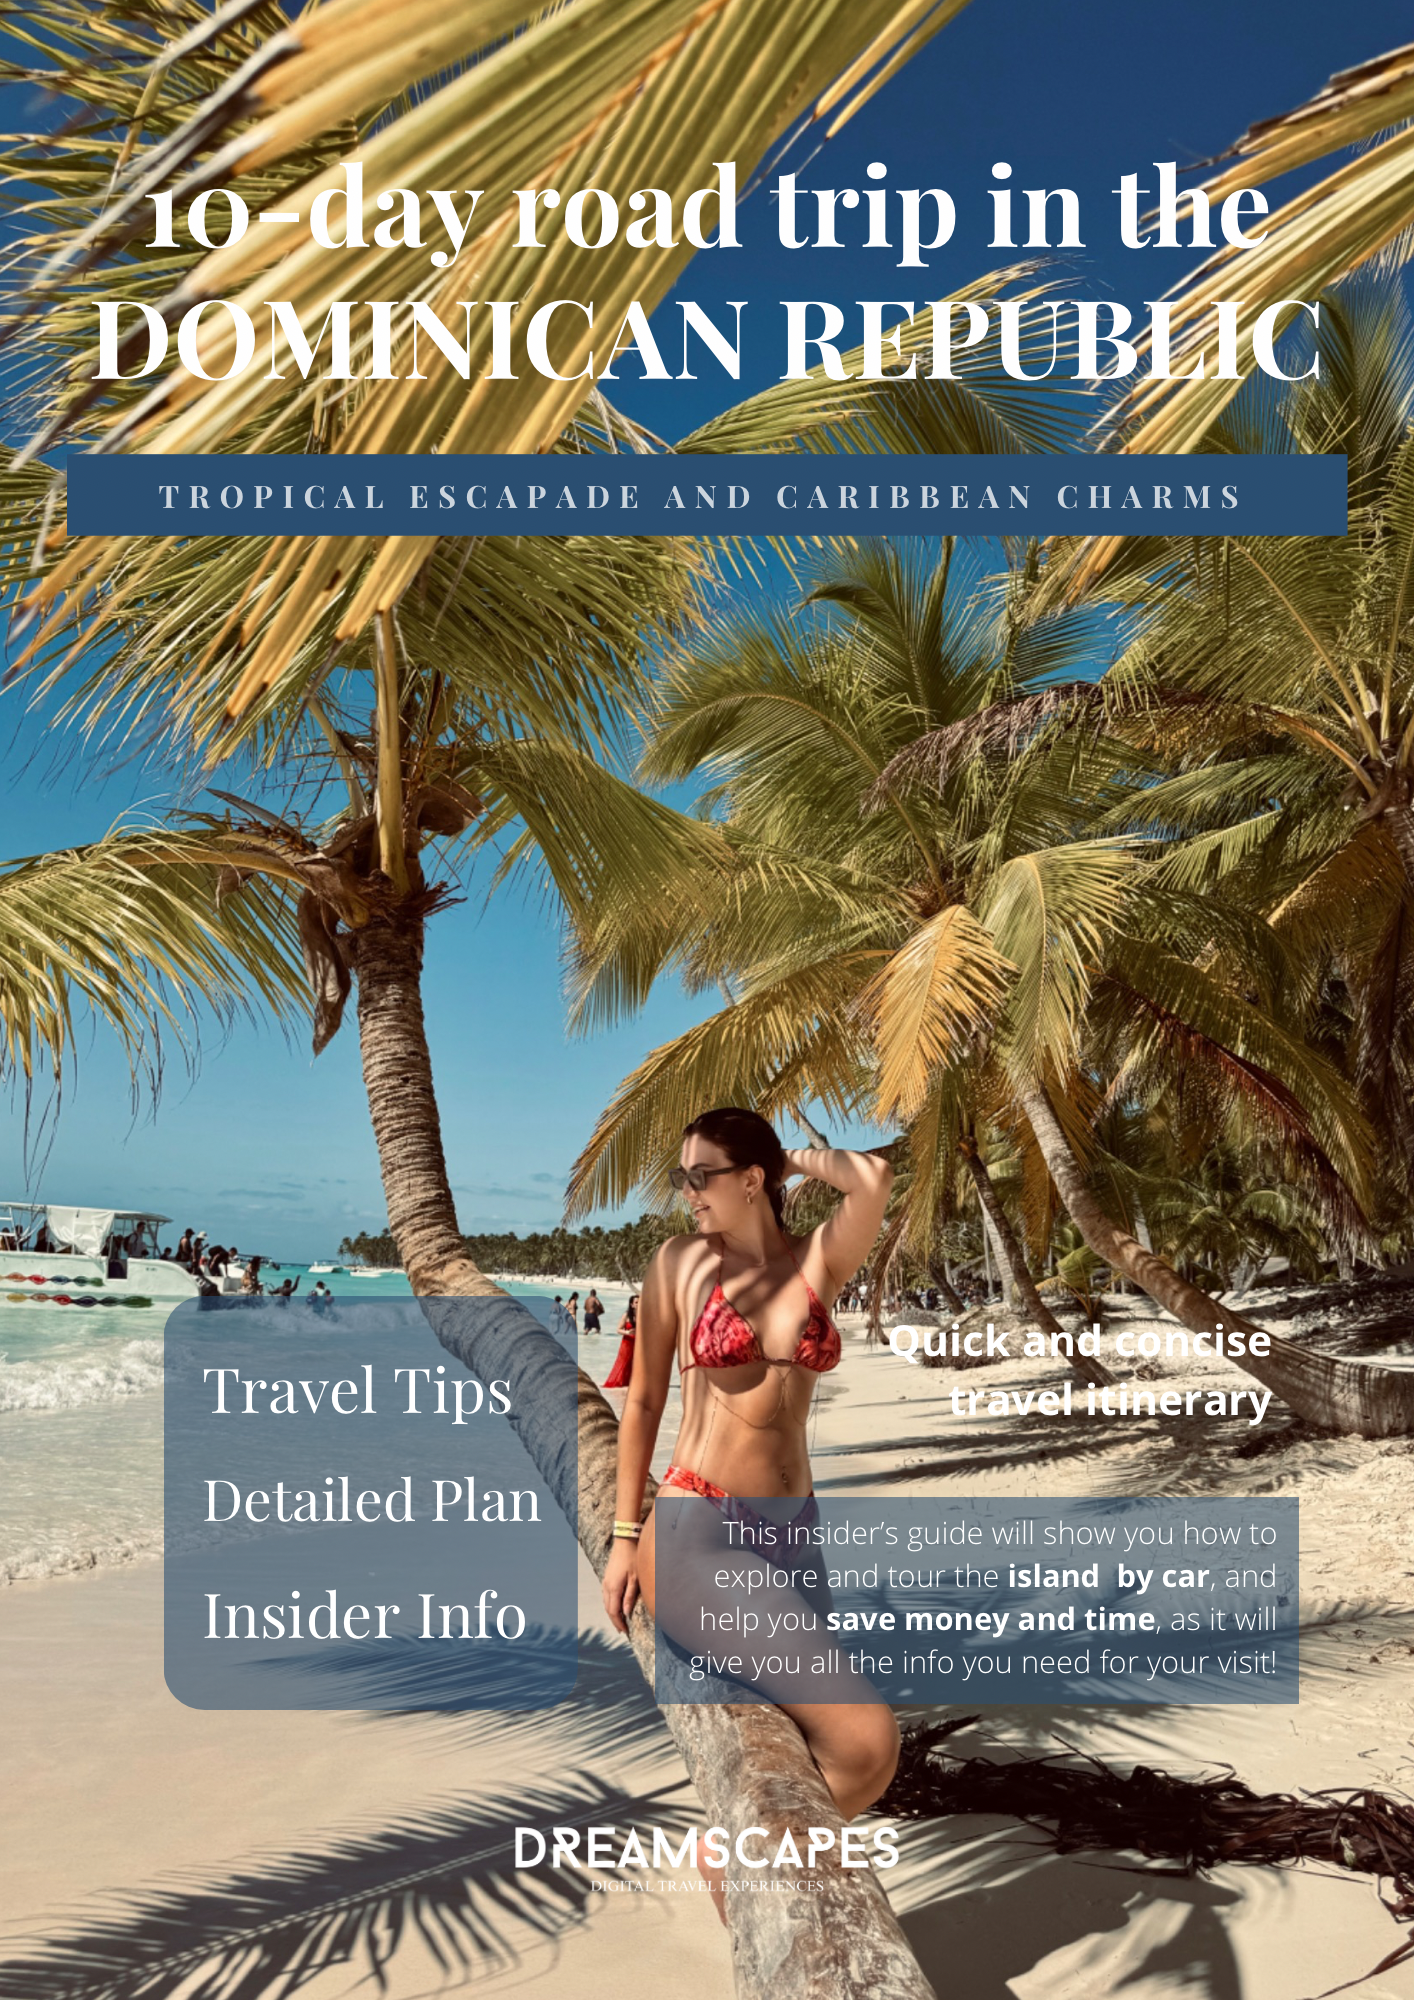 10-DAY ROAD TRIP IN THE DOMINICAN REPUBLIC